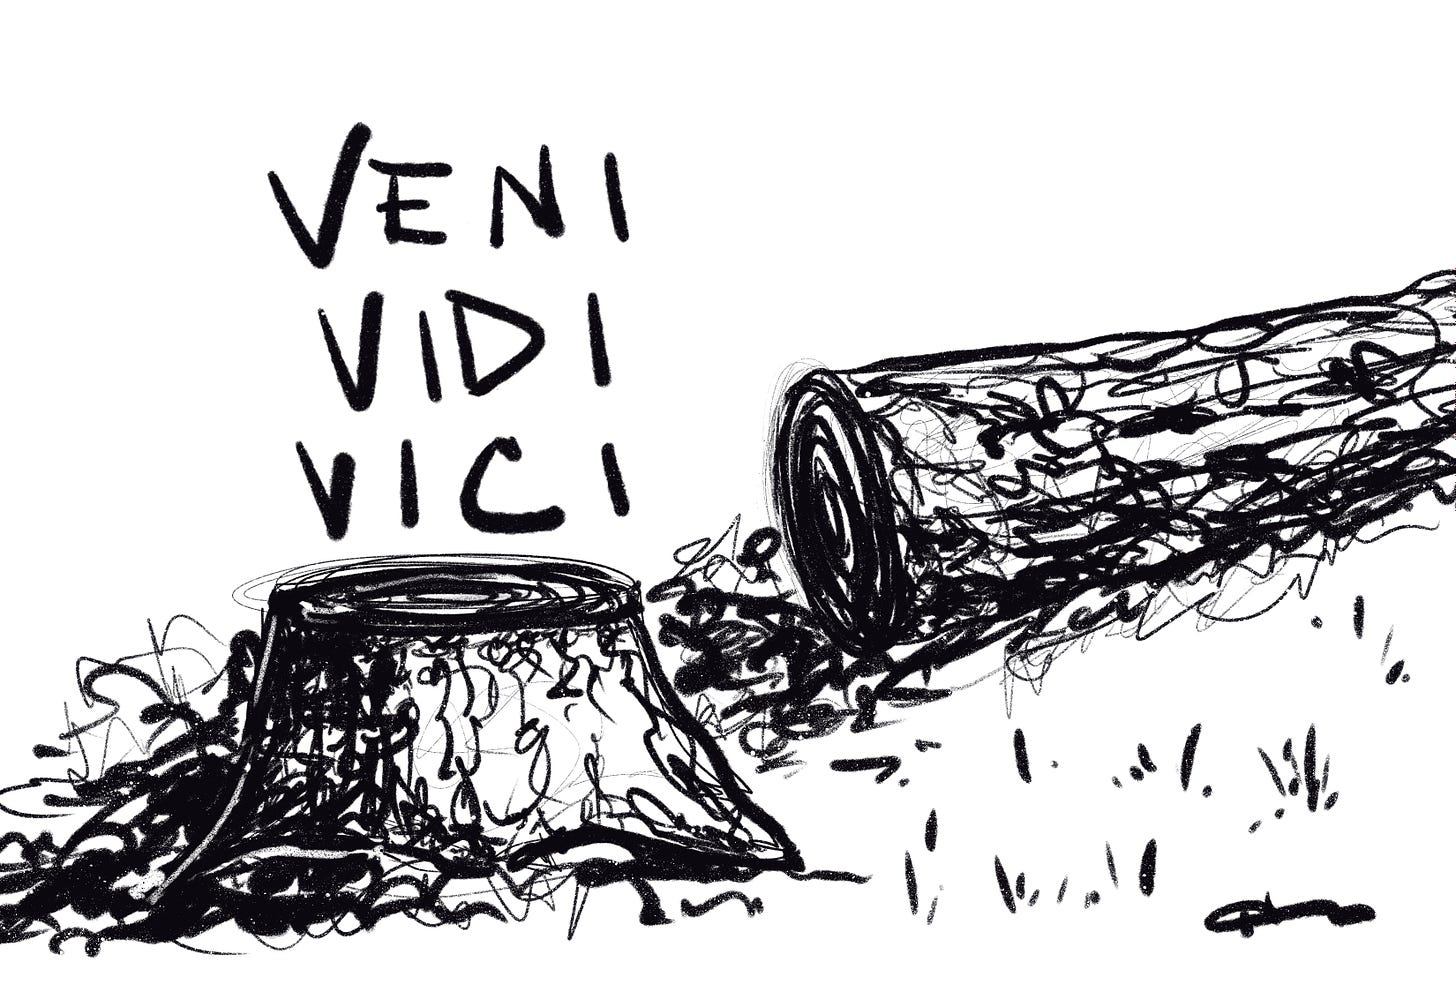 A roughly drawn digital illustration of a tree laying next to it's stump with Julius Caesar's words Veni, vidi. vici written above. 